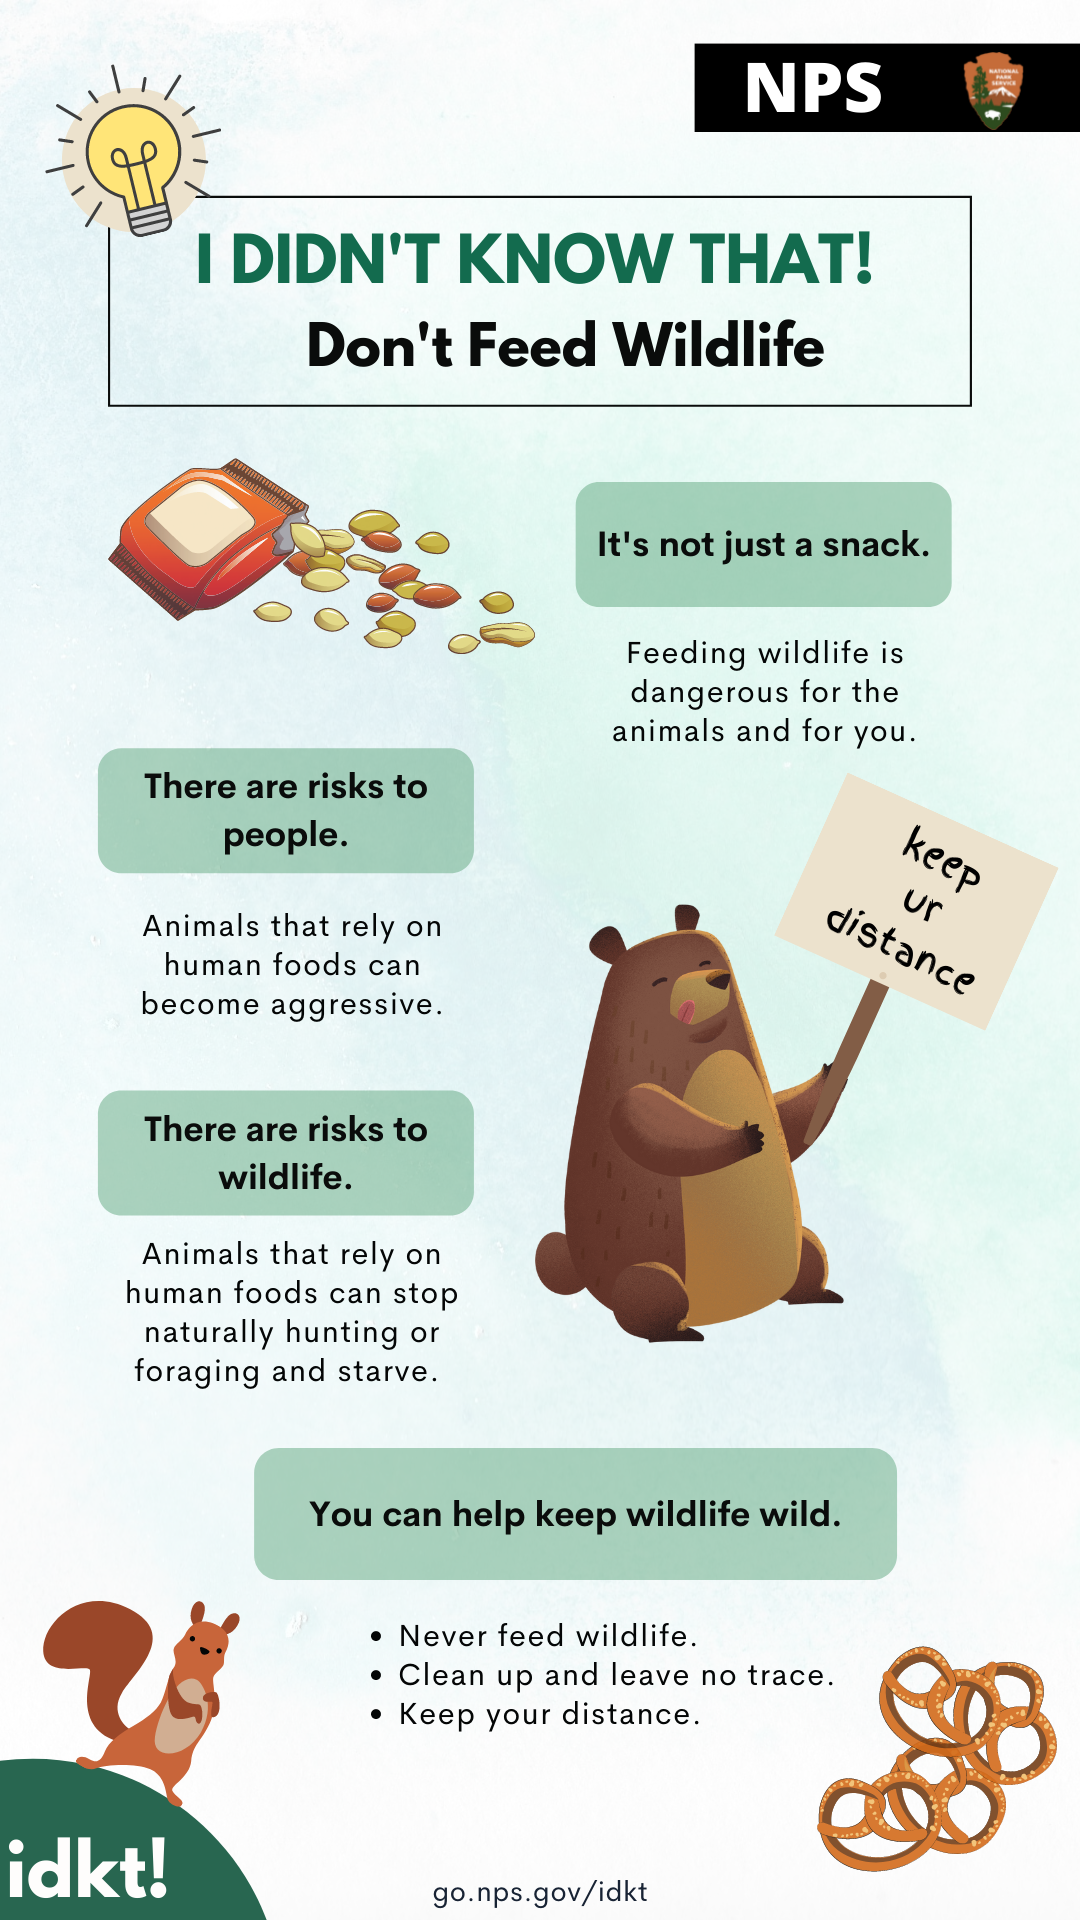 I Didn't Know That!: Don't Feed Wildlife (. National Park Service)